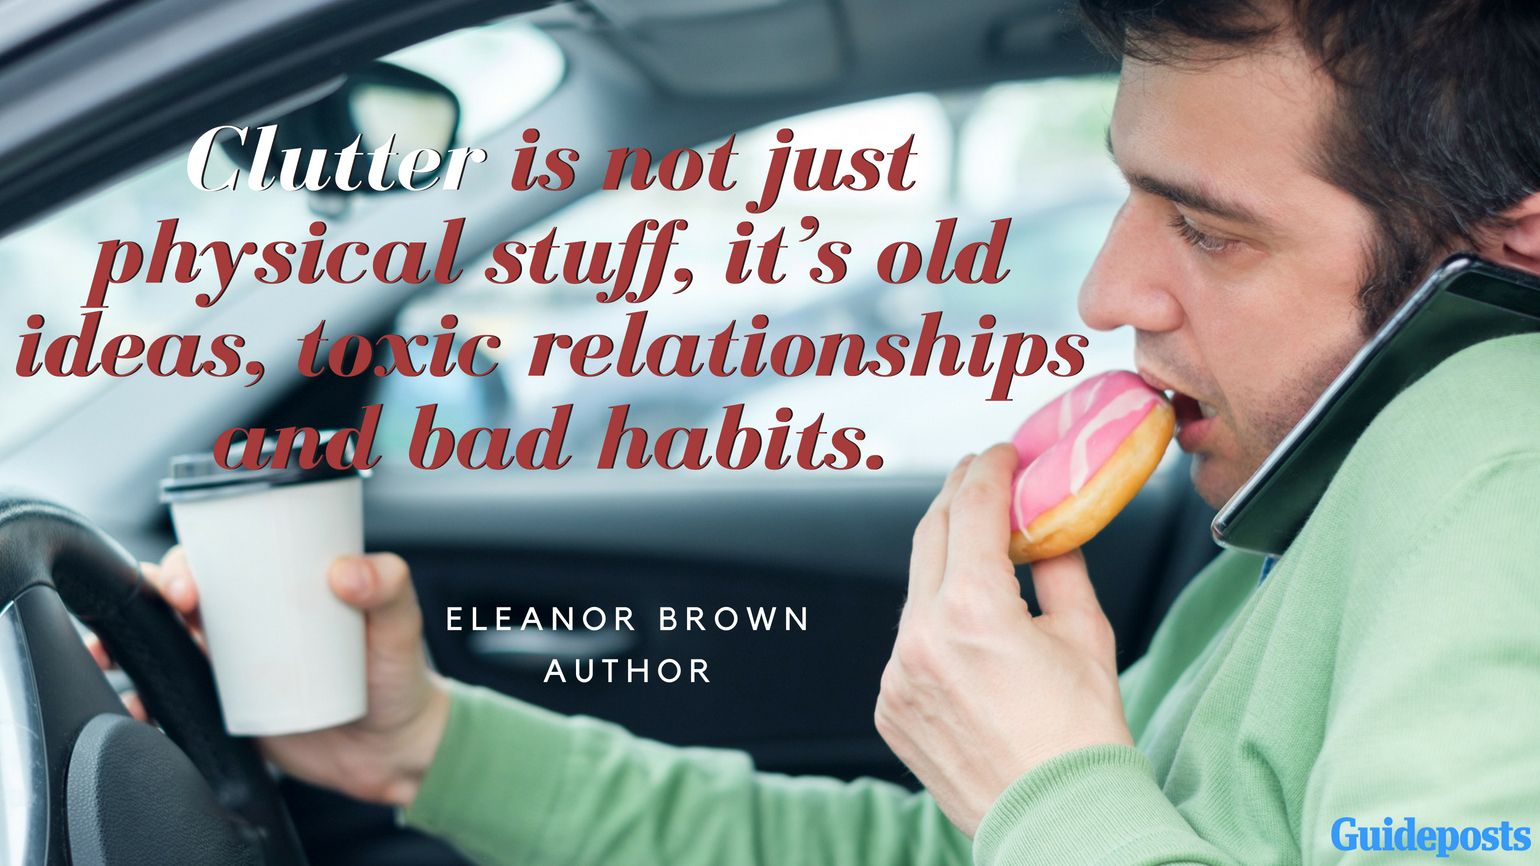 Motivational Quotes for Decluttering: Clutter is not just physical stuff, it’s old ideas, toxic relationships and bad habits. - Eleanor Brown, Author better living life advice